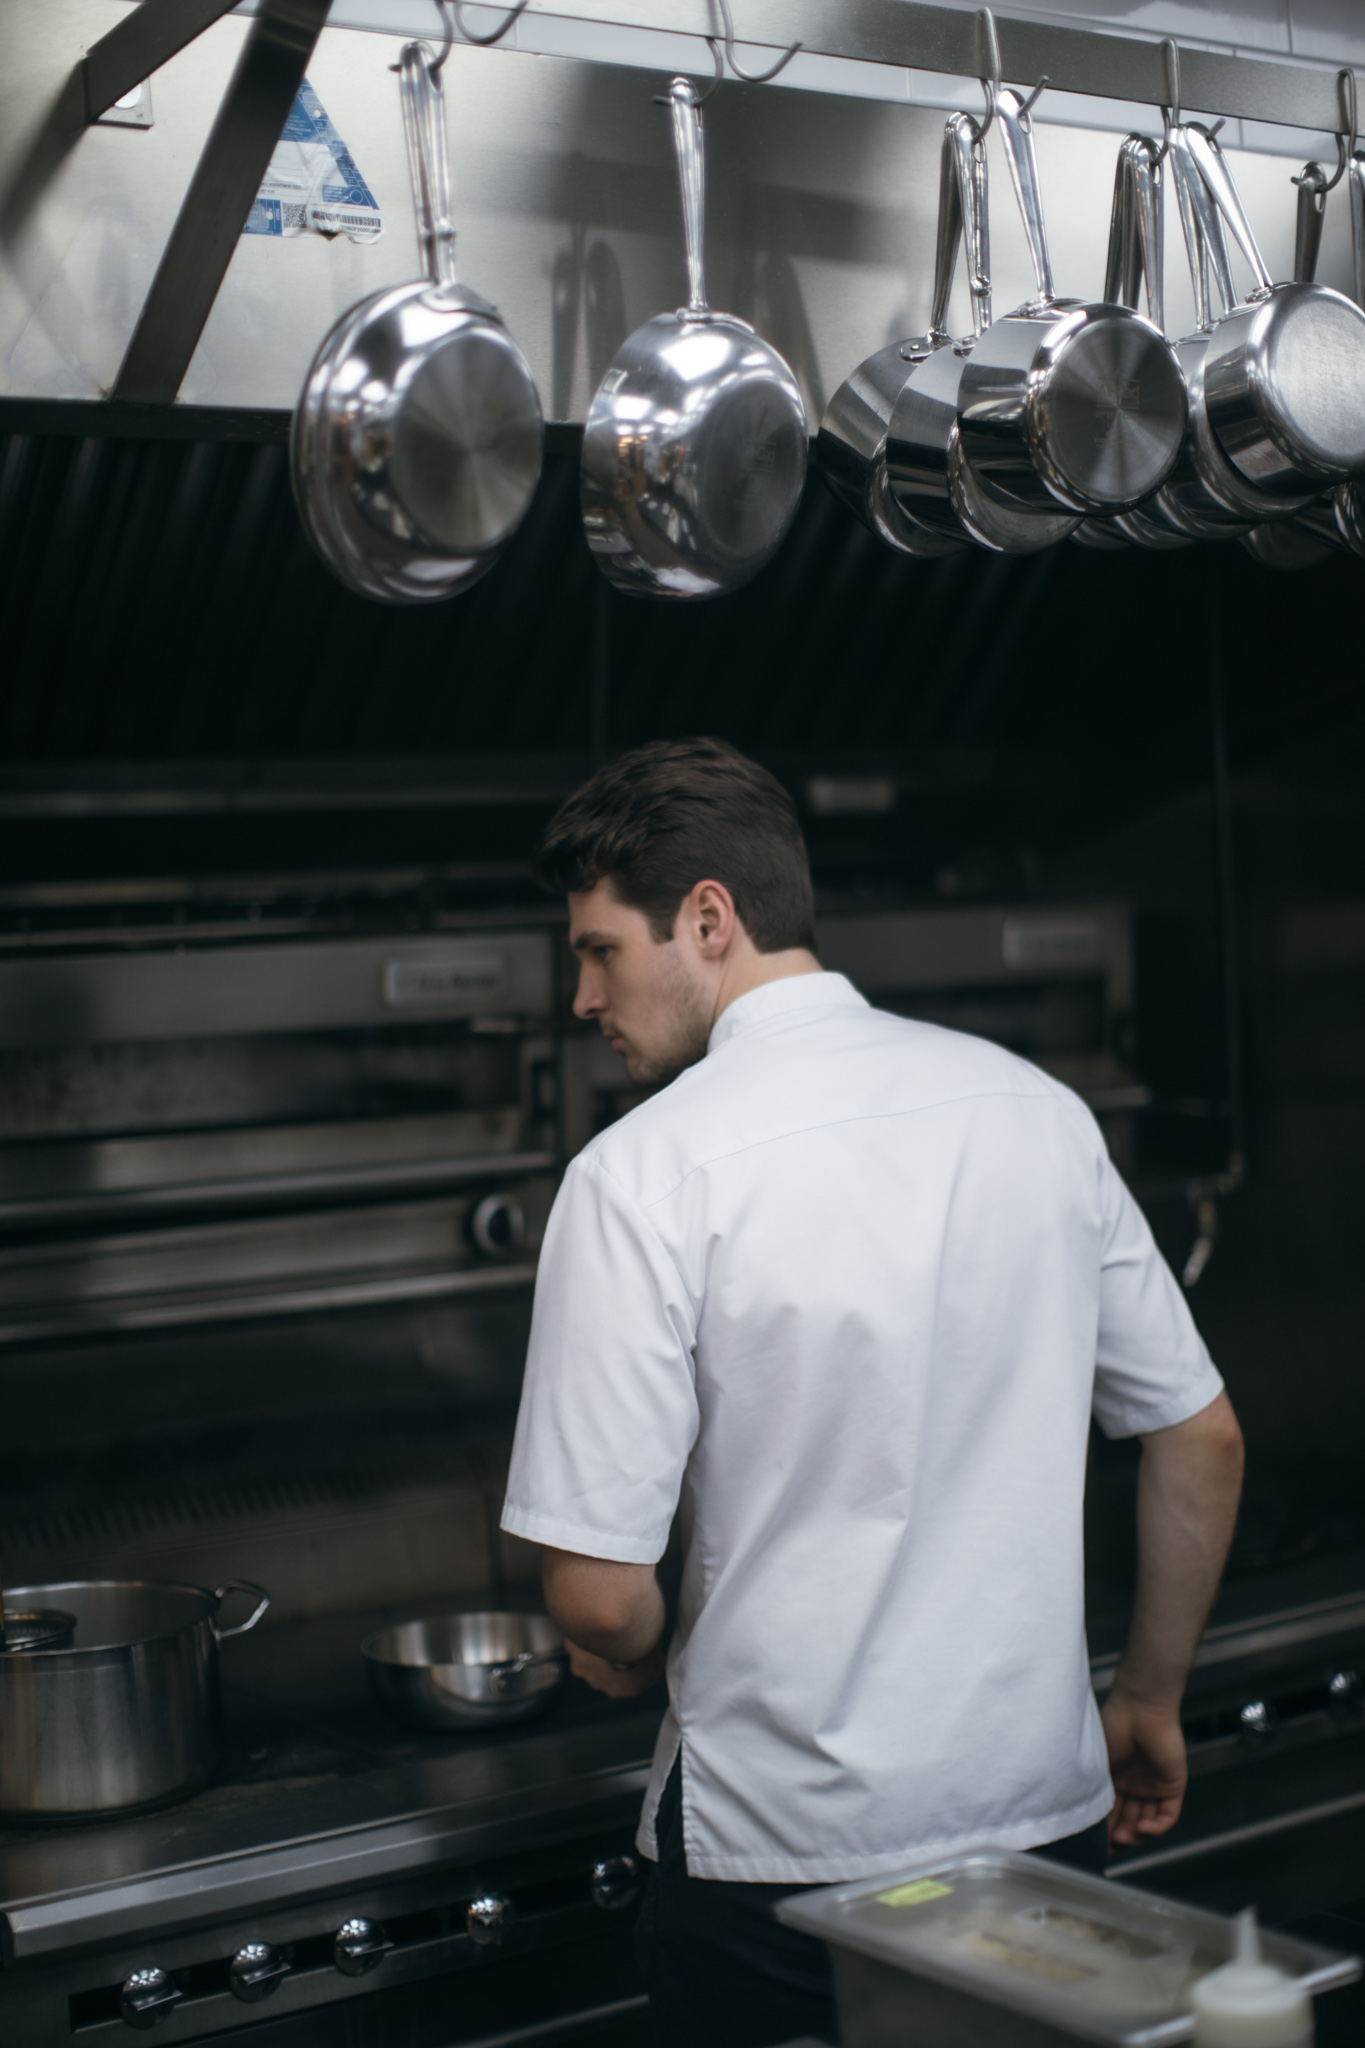 A person in a white chef's uniform is working in a commercial kitchen, standing in front of a stainless steel stove with pots and pans. The kitchen is equipped with hanging cookware overhead, indicating a professional cooking environment